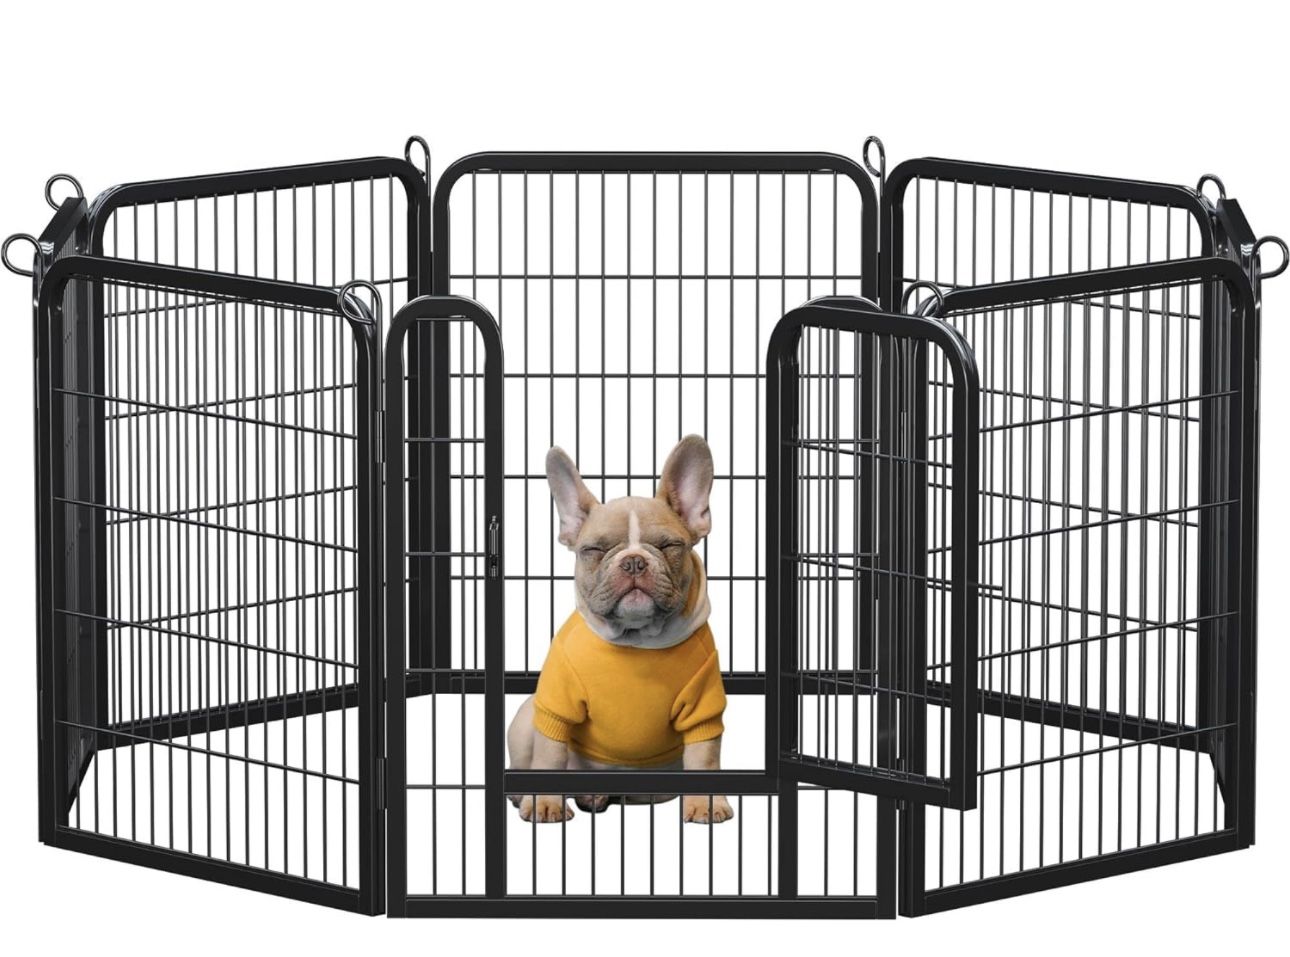 Dog Playpen Outdoor, 8 Panels 32" Pet Fence Puppy Pen for Small Animals/Cat/Rabbit Heavy Duty Foldable Pet Exercise Fence for Yard Garden RV Camping B